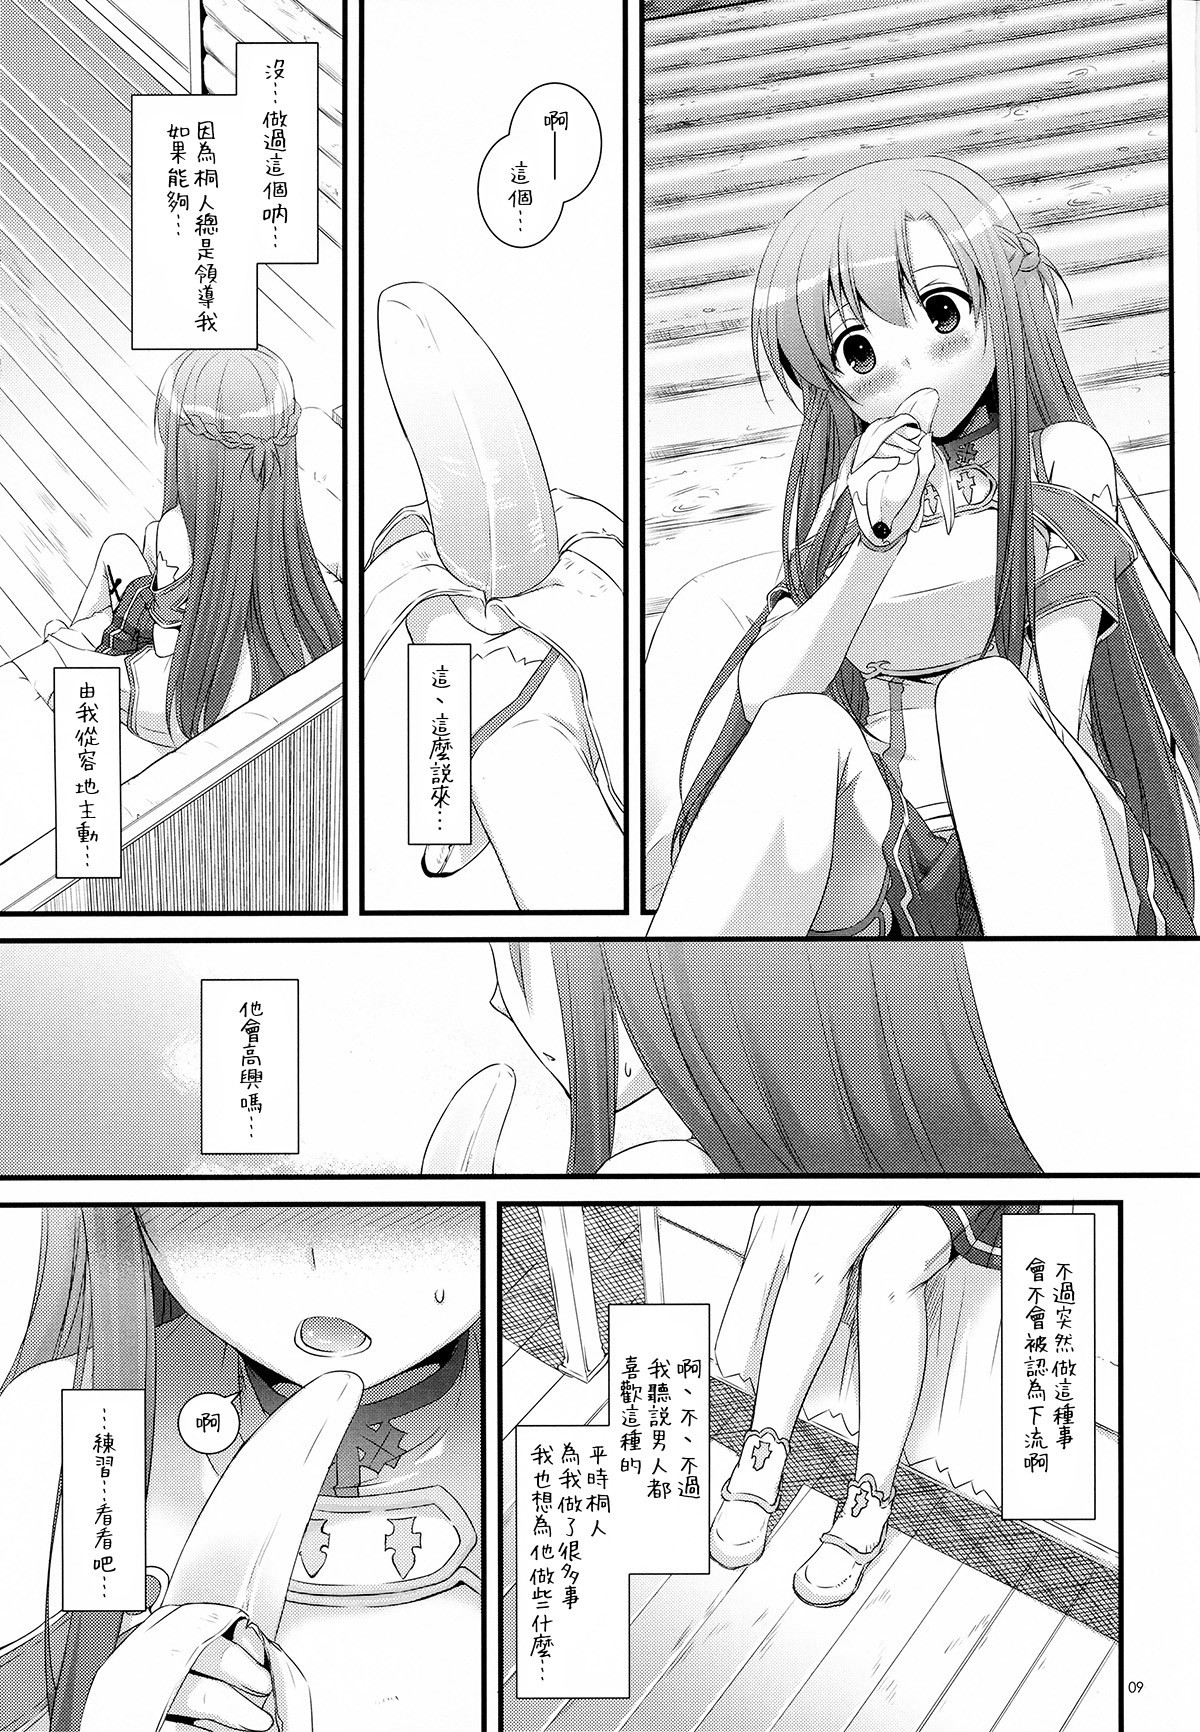 D.L. Action 71 hentai manga picture 8